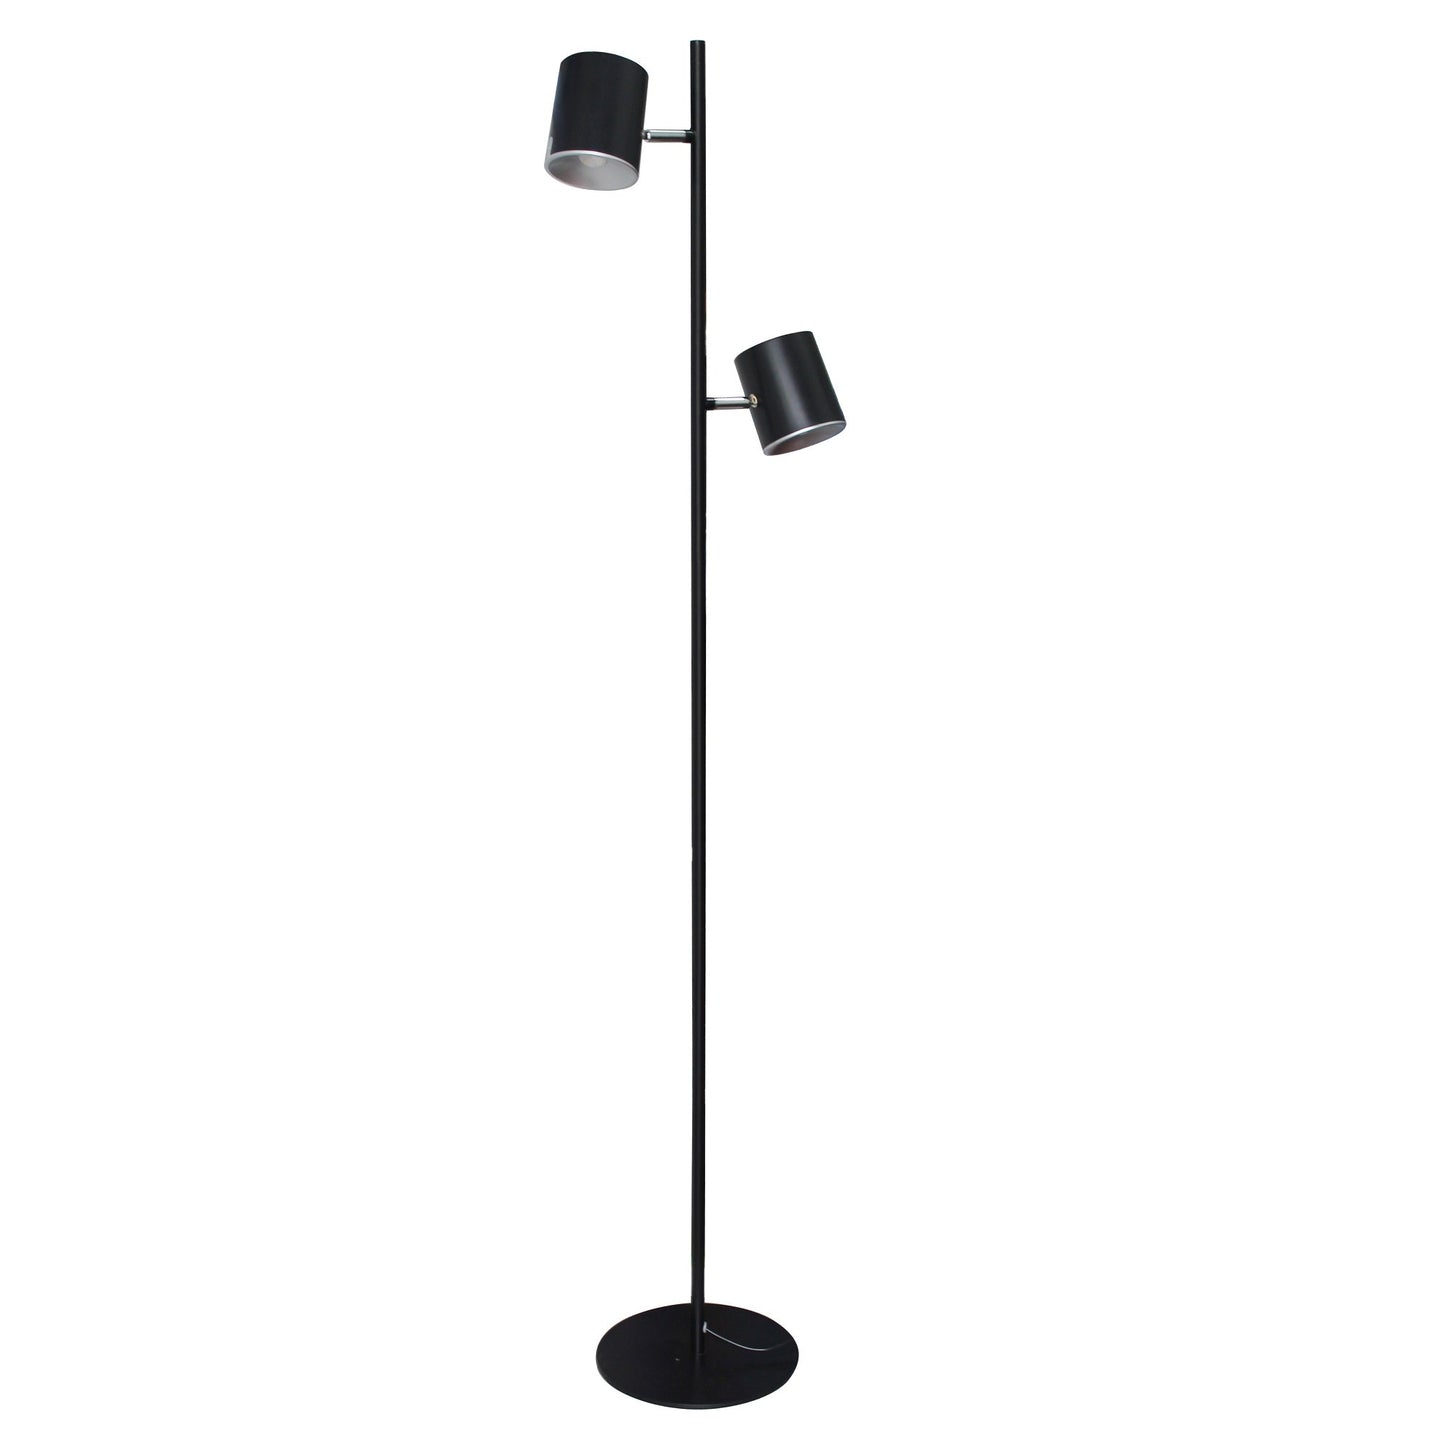 DAC® MP-322 Metal LED Floor Lamp with Two 340 ° Rotating Heads-Black